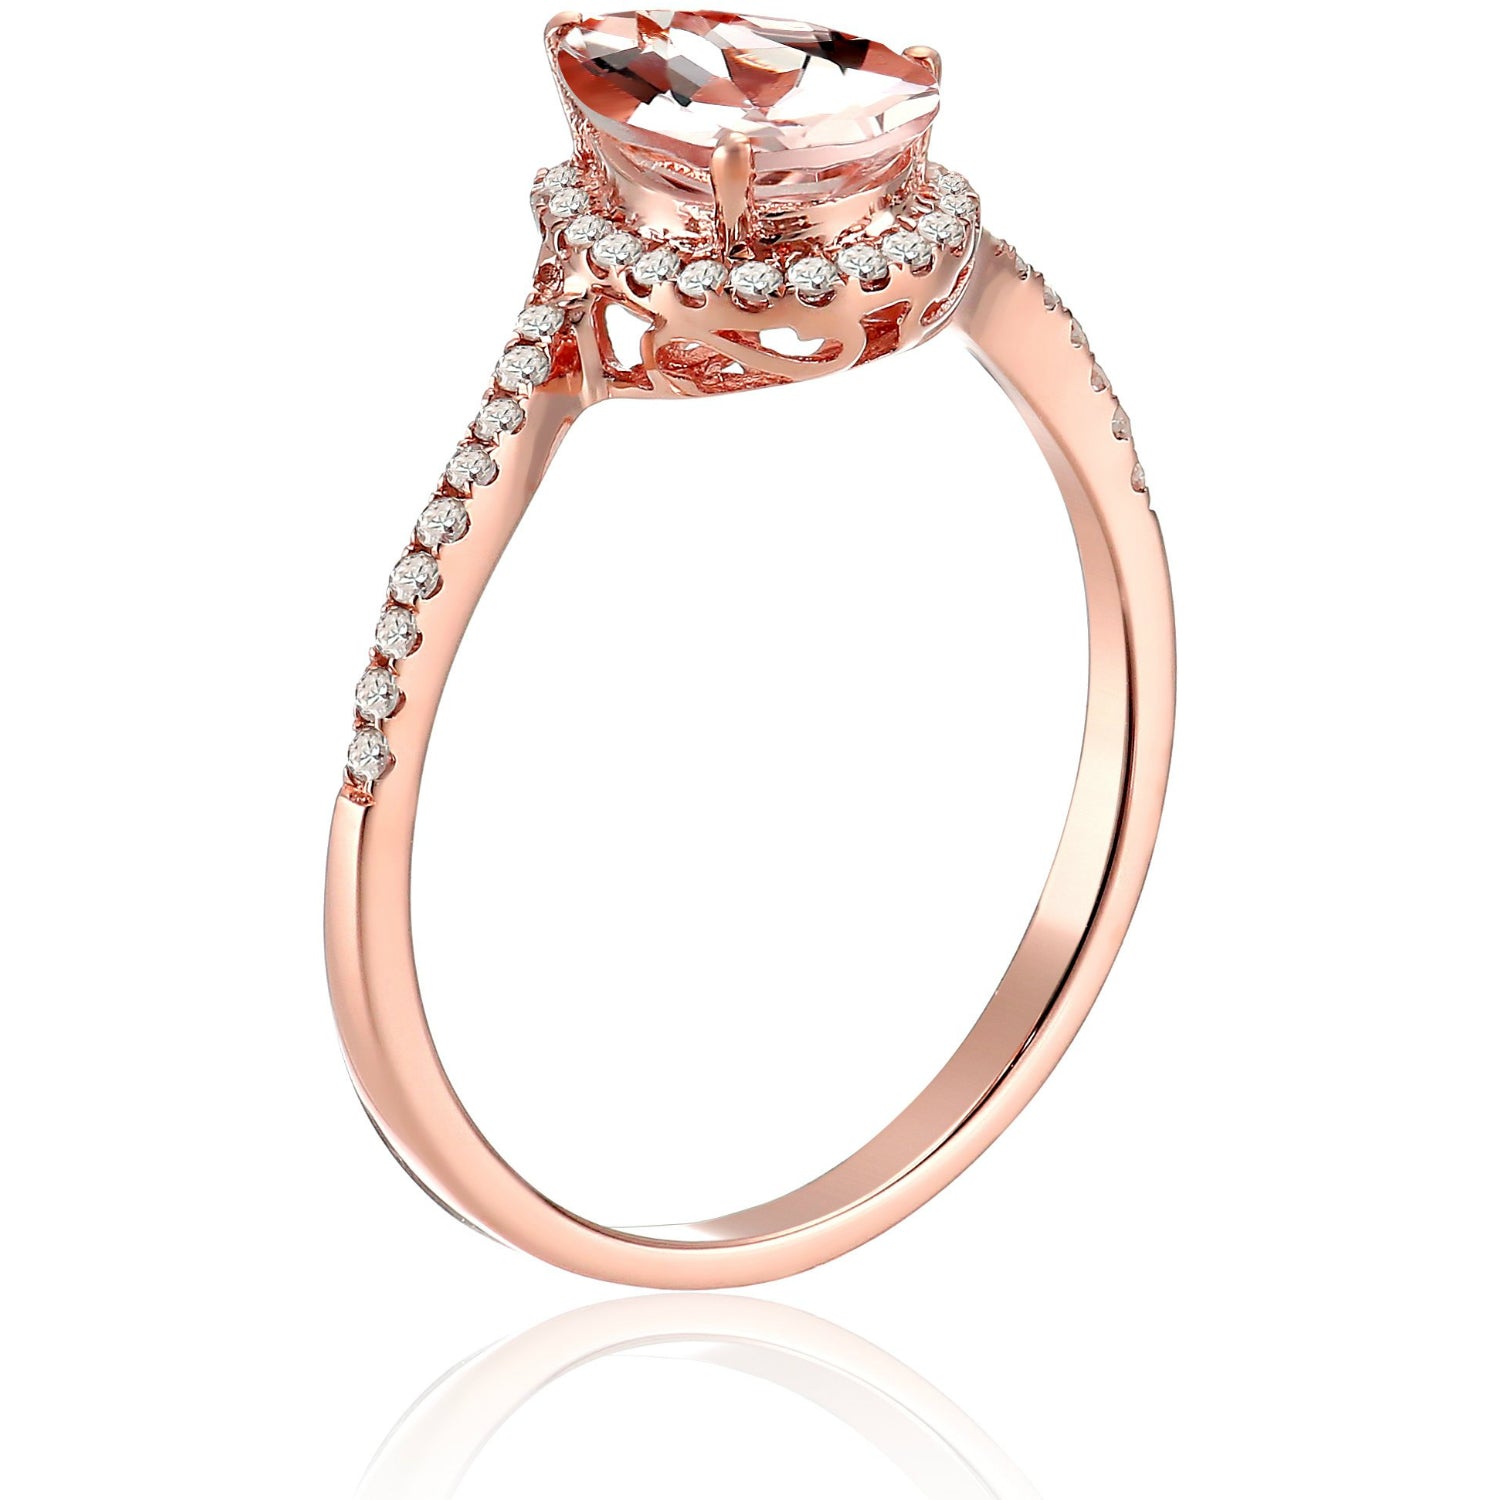 10k Rose Gold Morganite and Diamond Princess Diana Pear Shape Engagement Ring (1/10cttw, H-I Color, SI1-SI2 Clarity), - pinctore